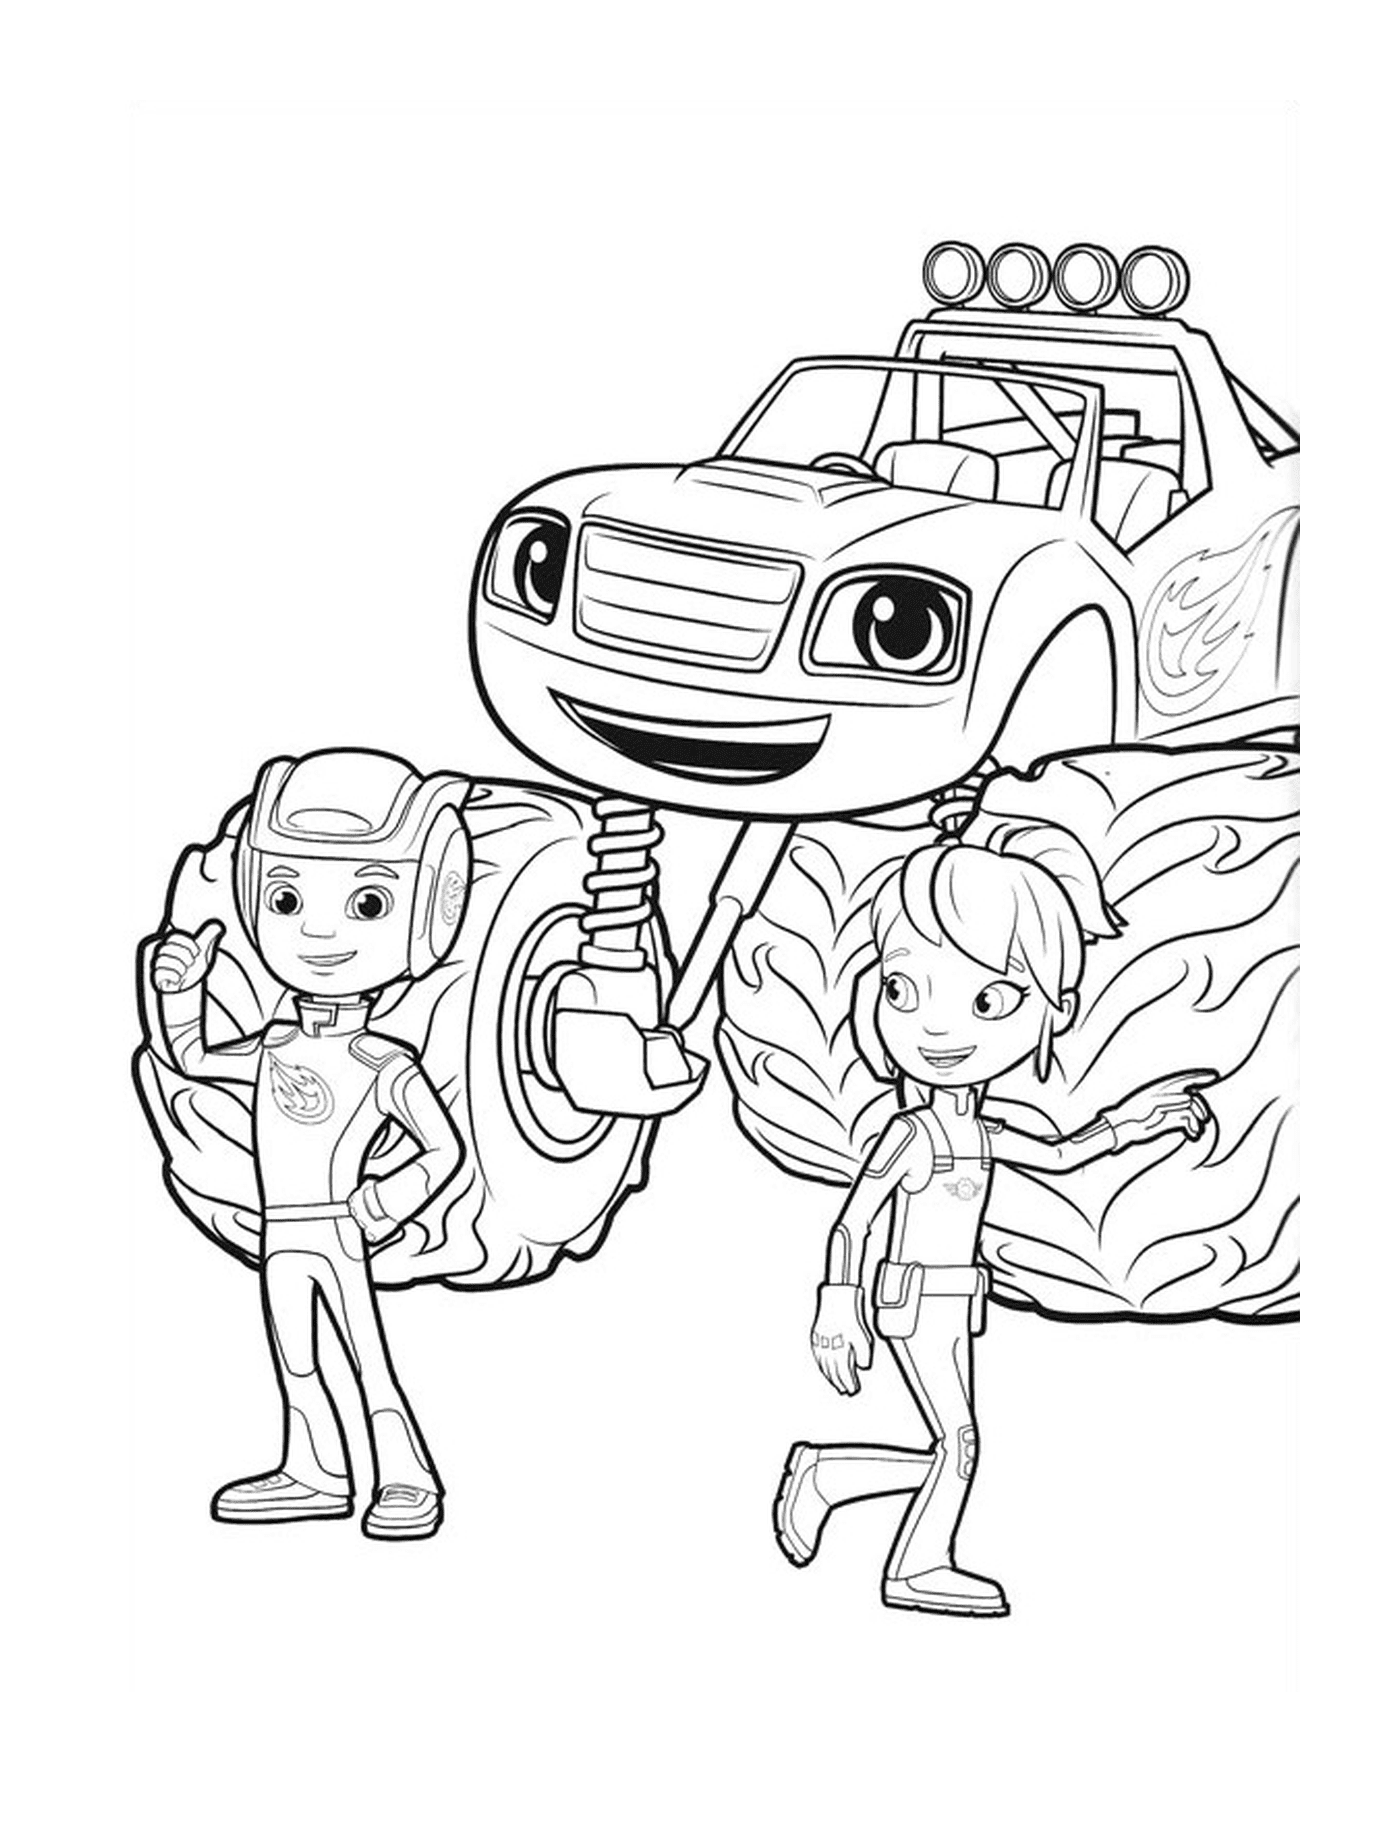  A boy and a girl standing next to a truck 